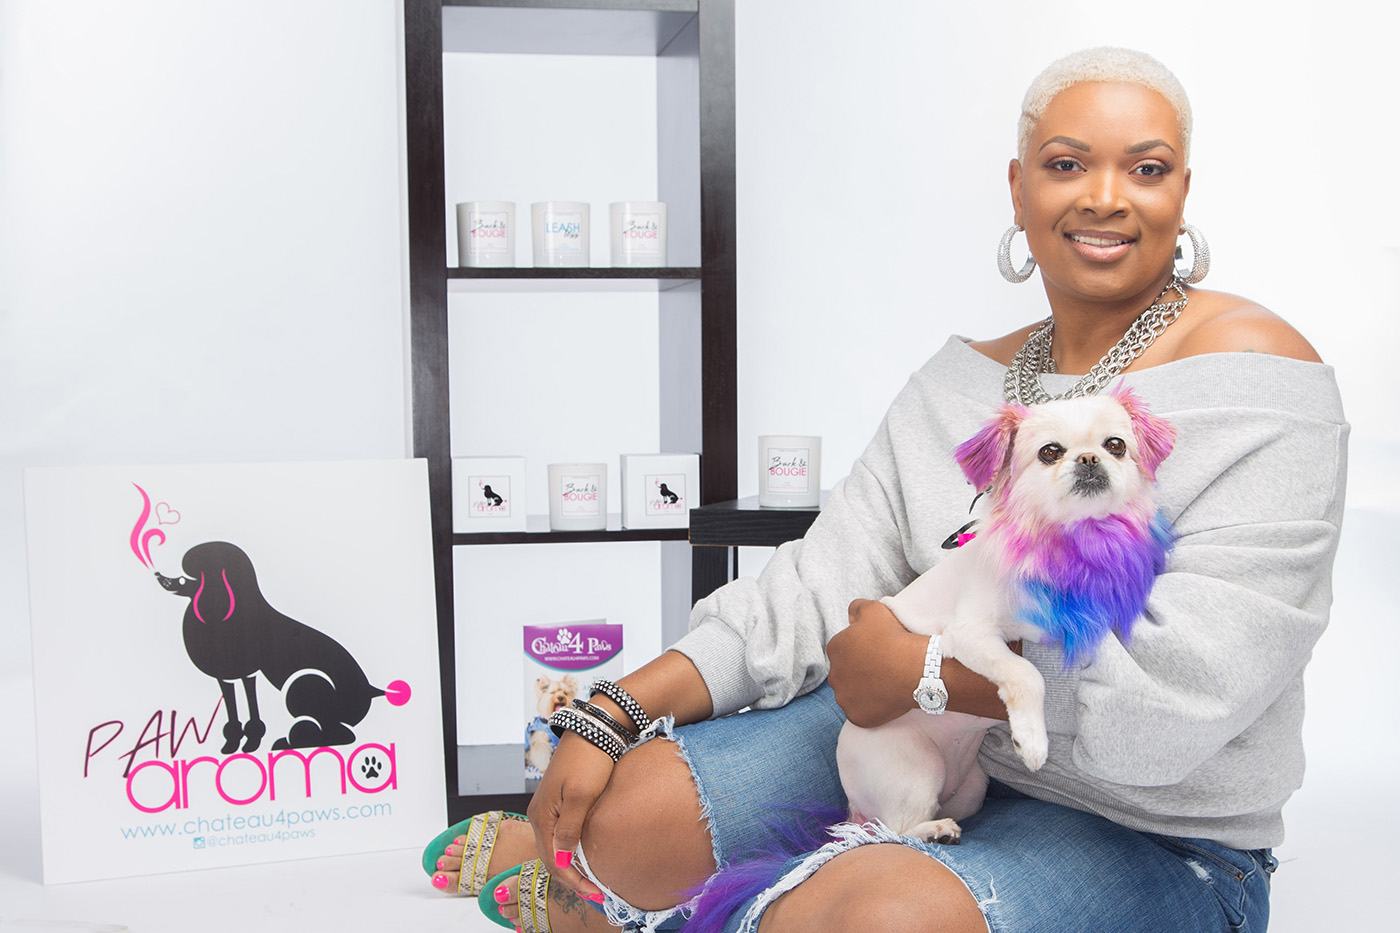 Janelle Russell with Toy Poodle